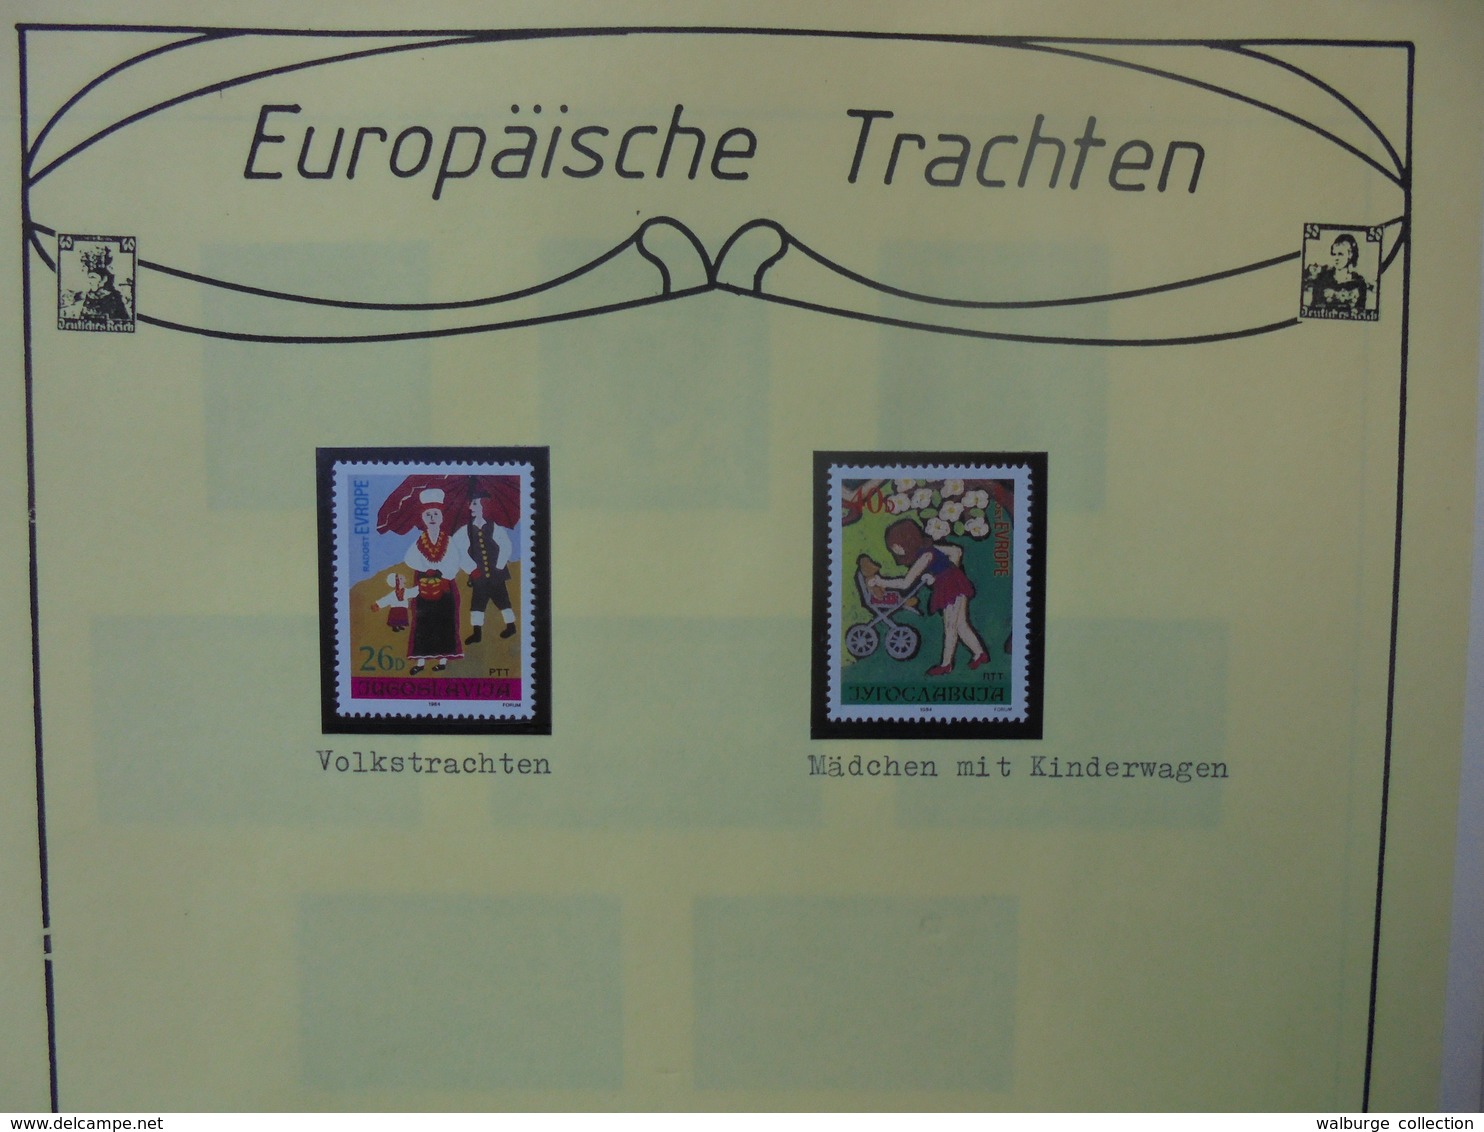 EUROPE-BLOCS-TIMBRES-FDC-COURRIERS (2463) 2 KILOS 800